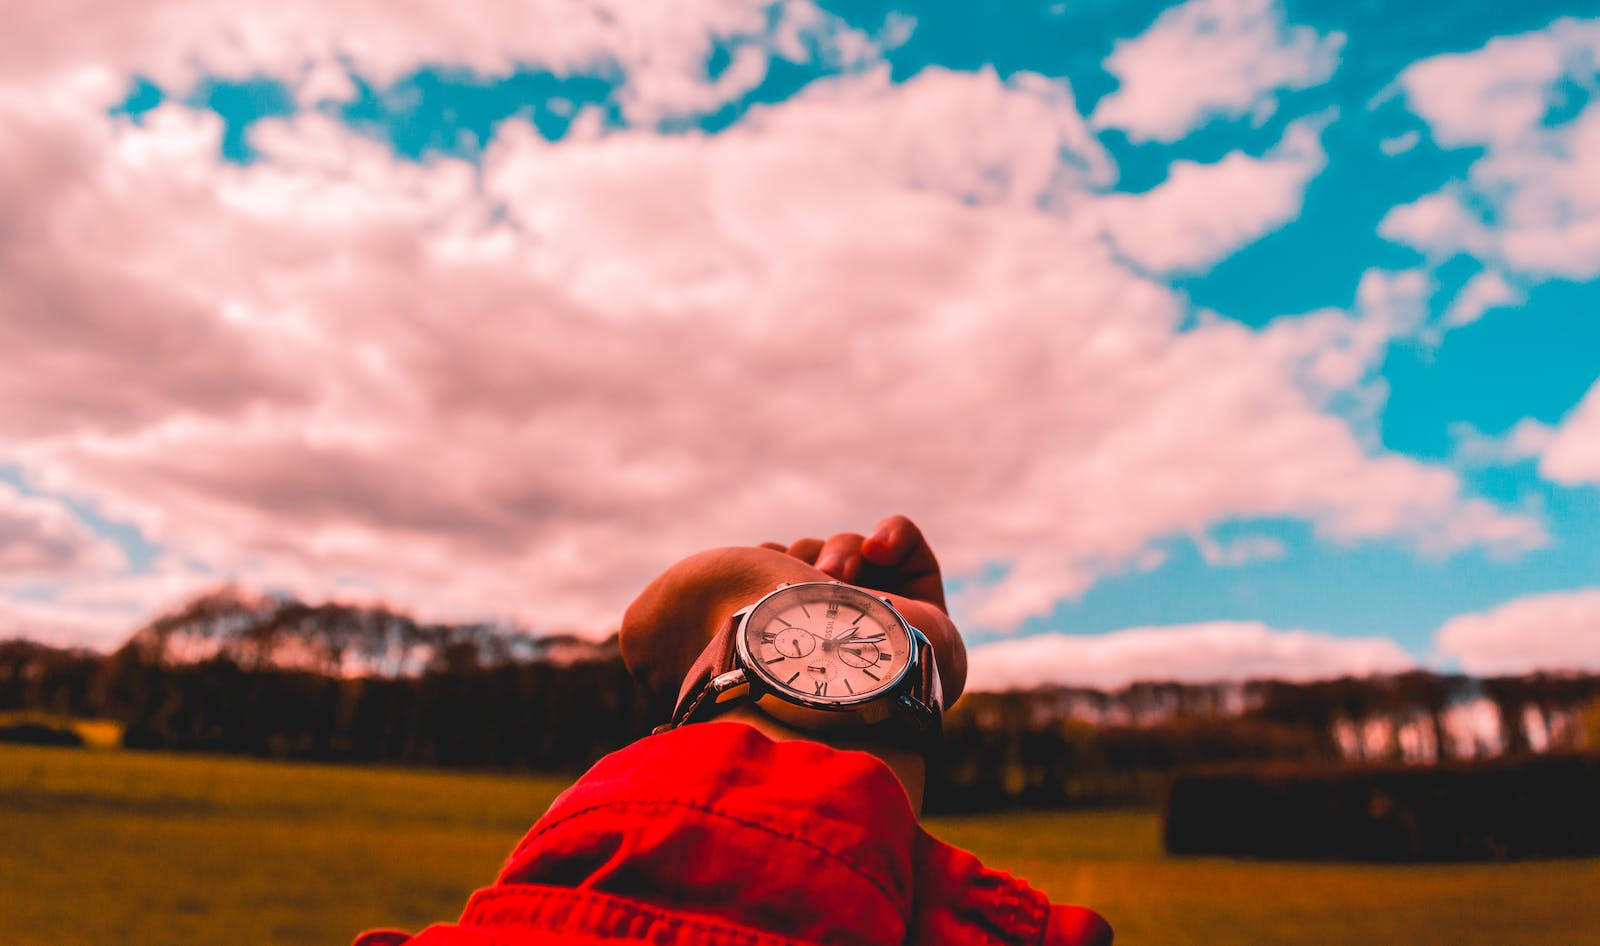 Time Wrist Watch And Sky Wallpaper